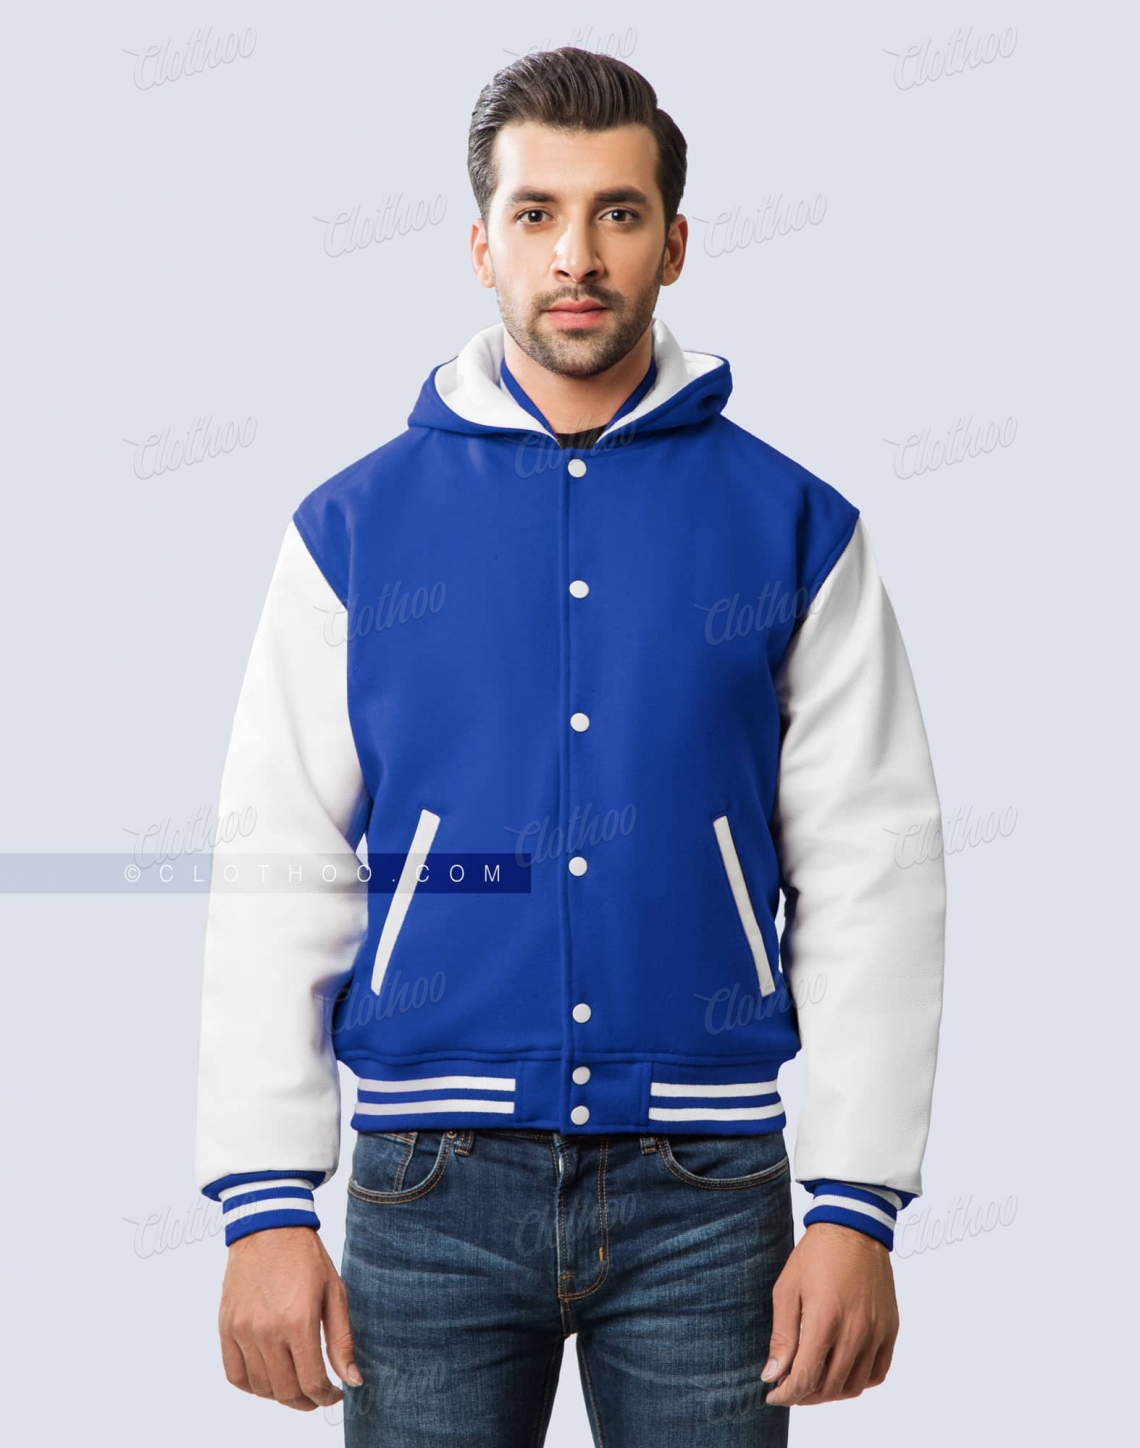 Royal blue letterman jacket with hood and white leather sleeves